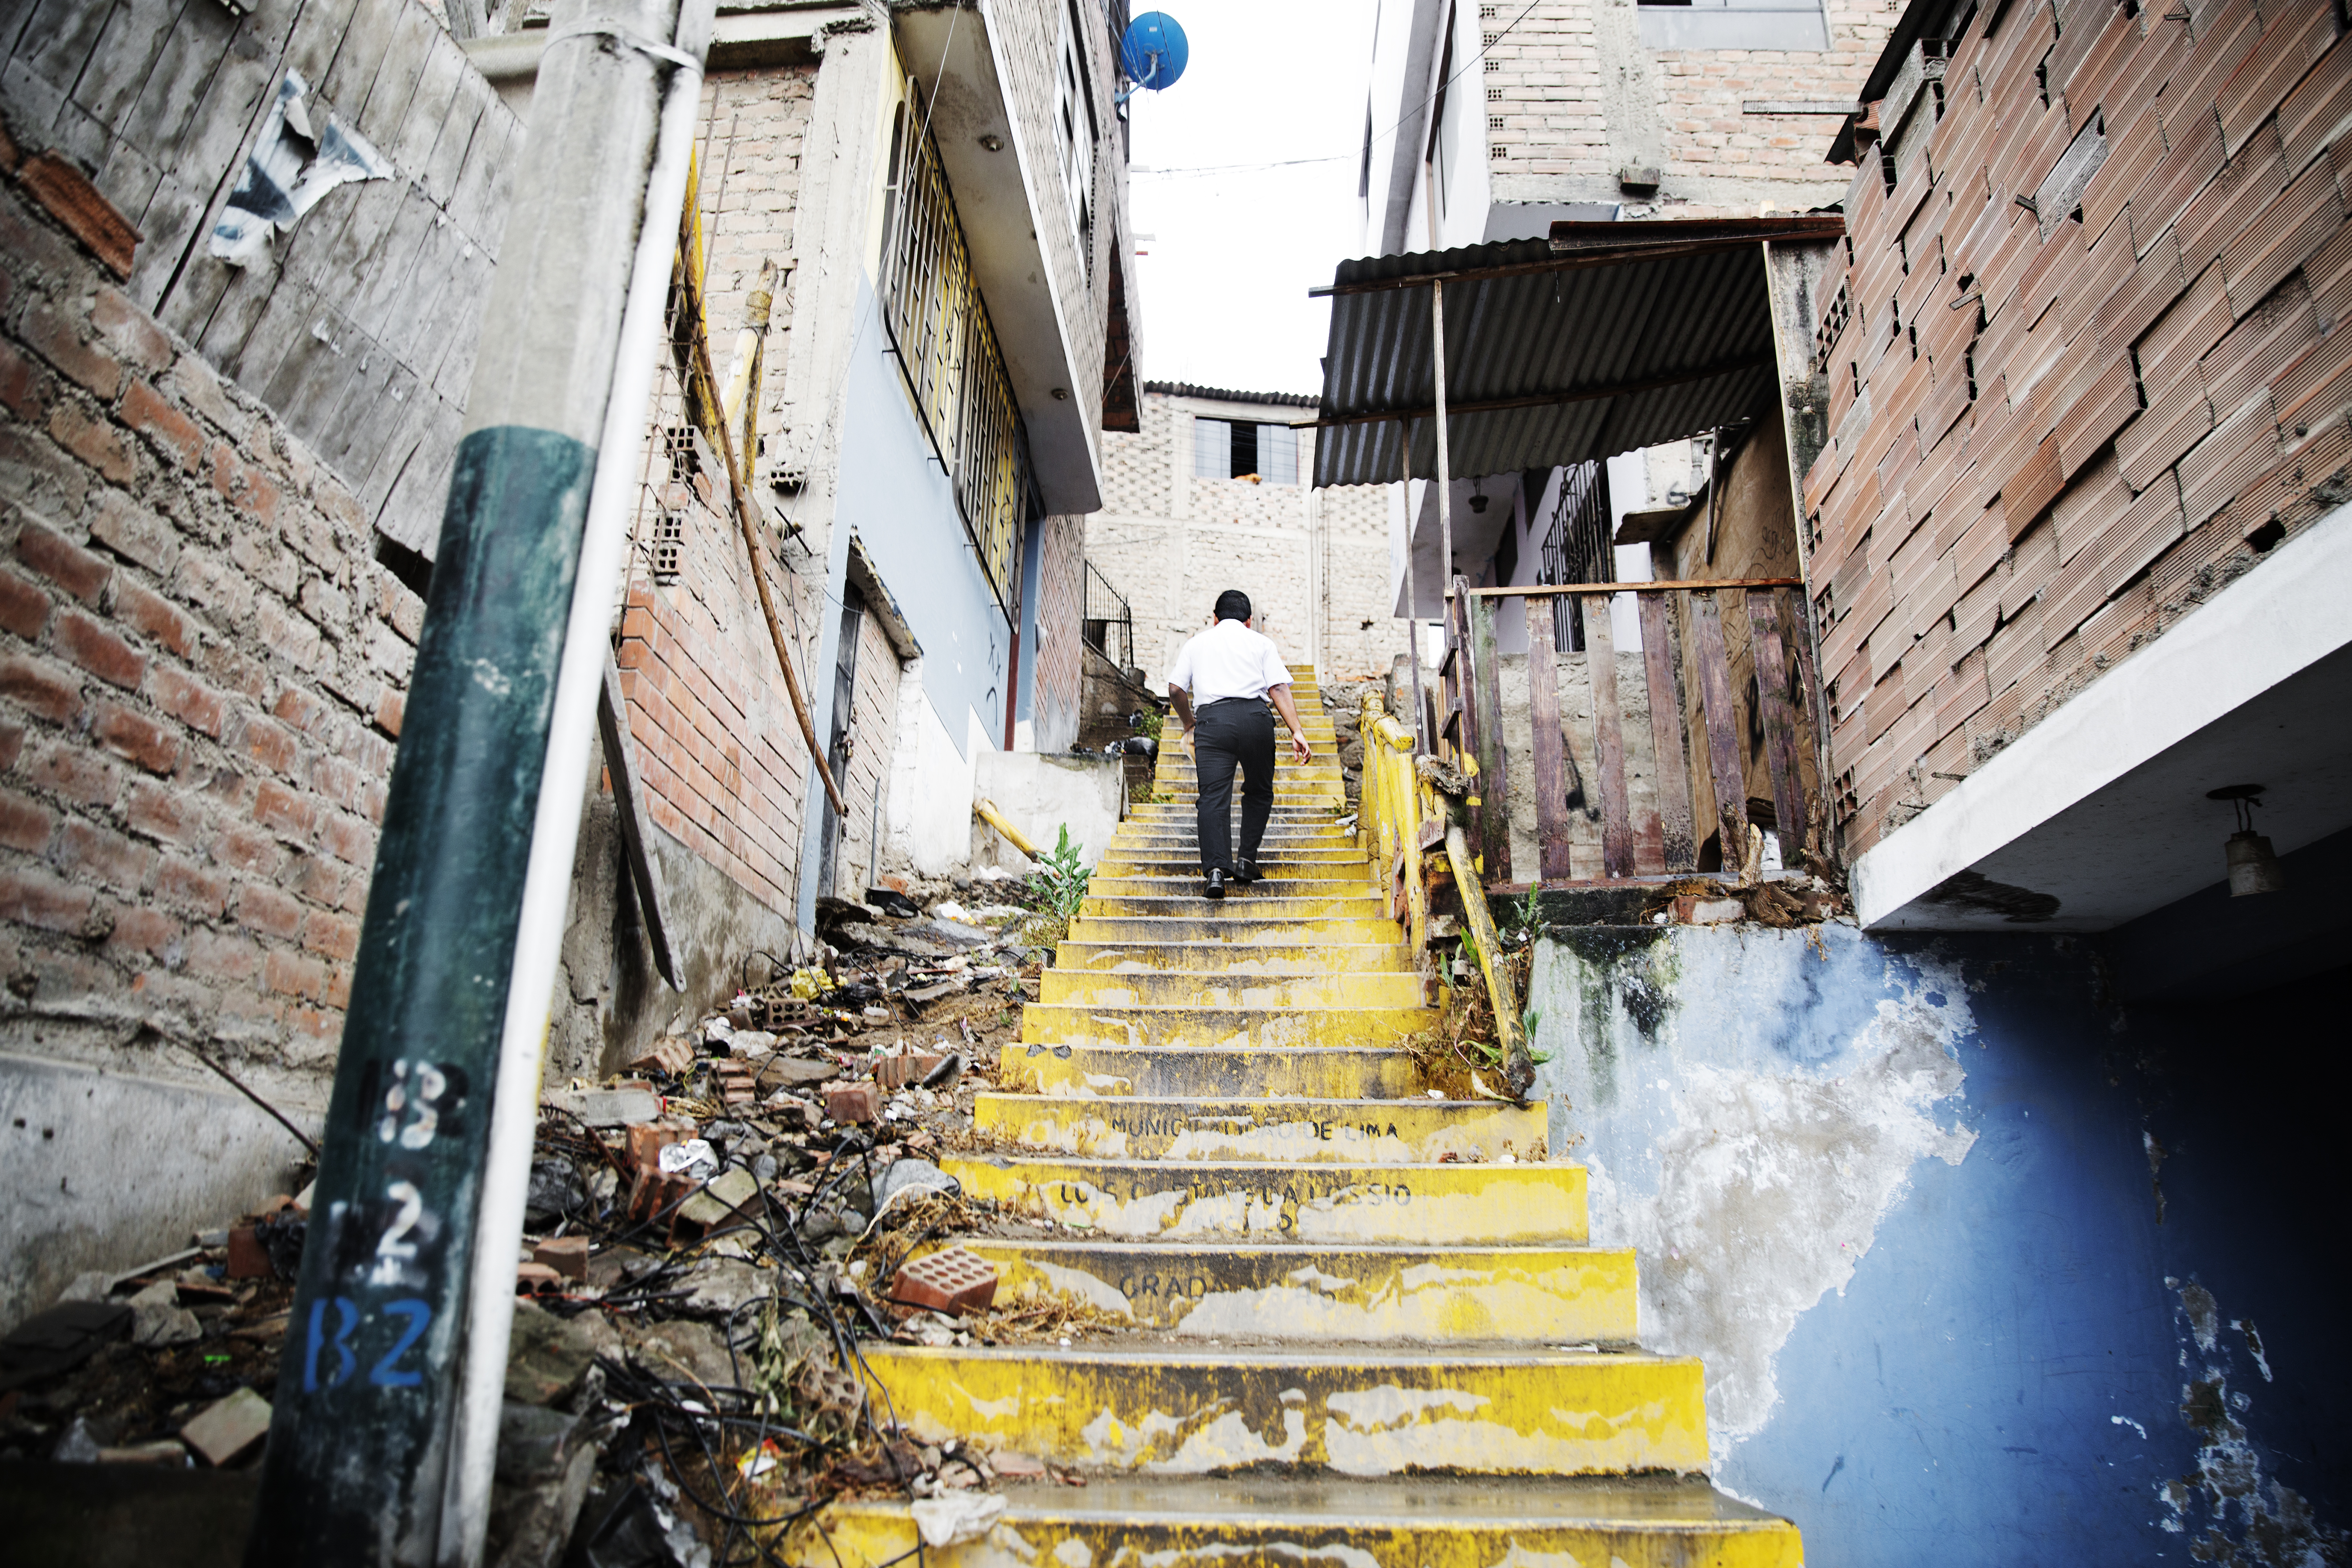 A man walks up a decrepit staircase in his neighborhood in Lima, Peru.